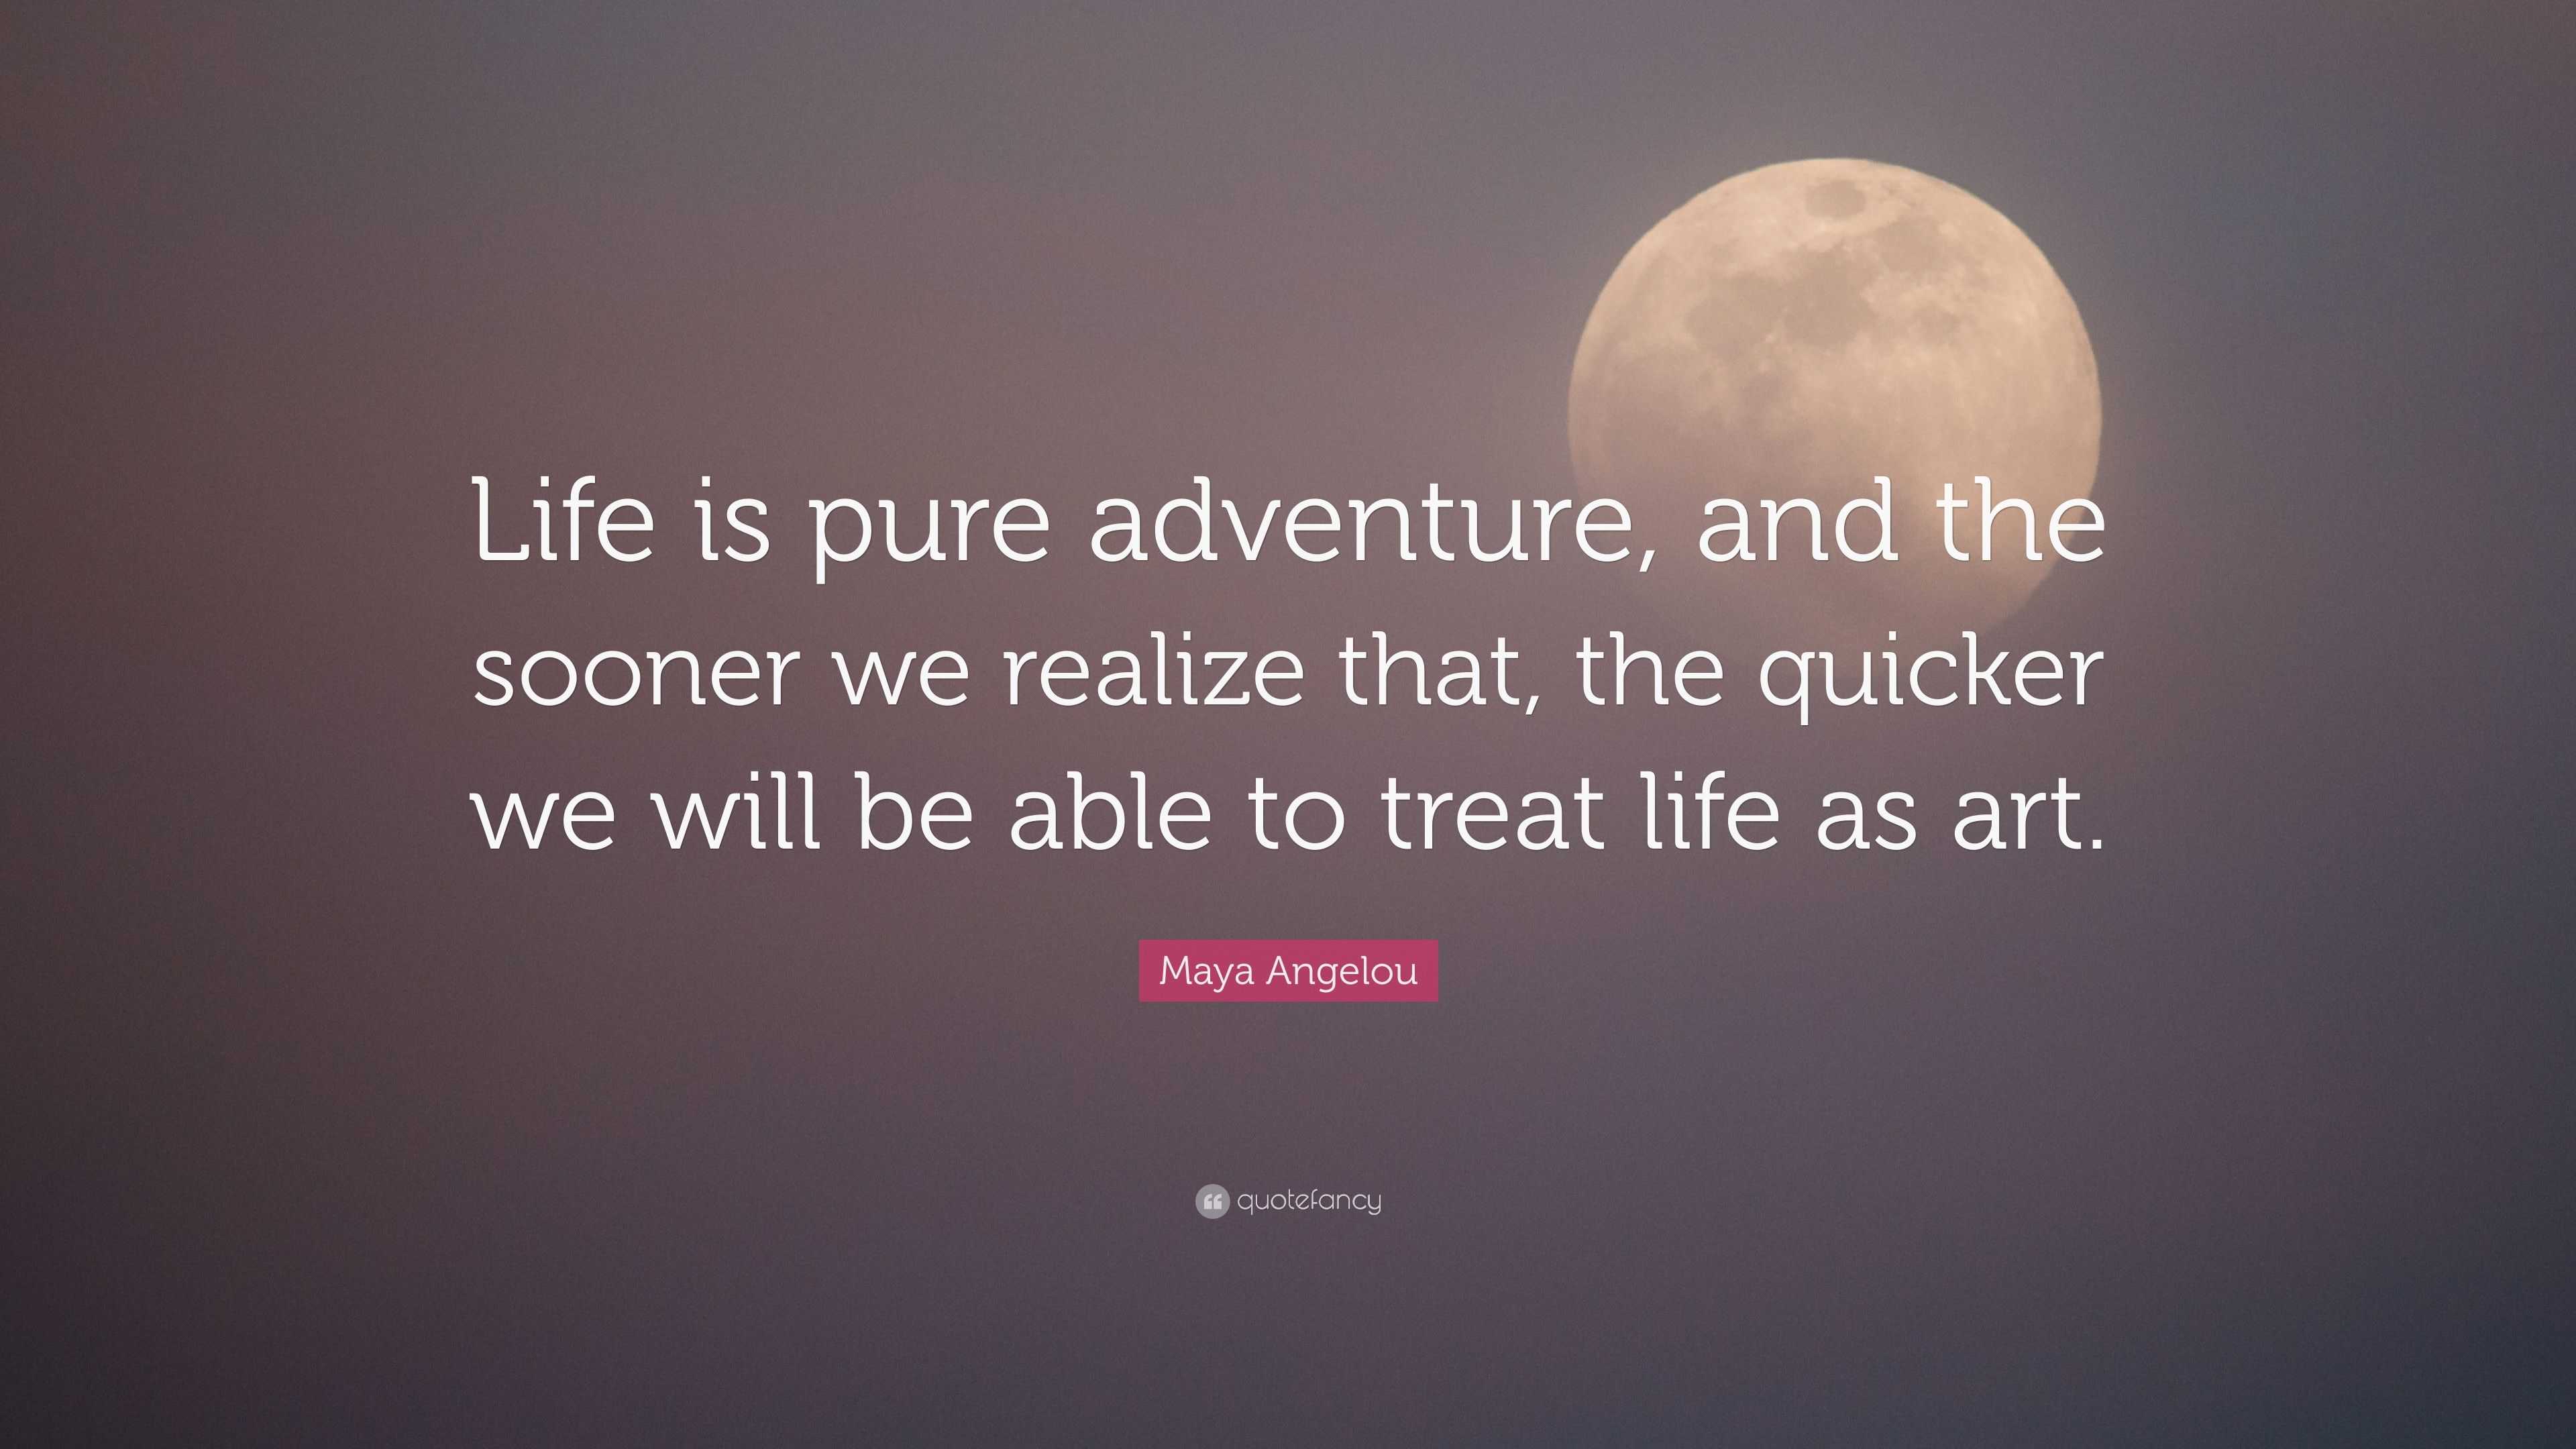 Maya Angelou Quote: “Life is pure adventure, and the sooner we realize ...